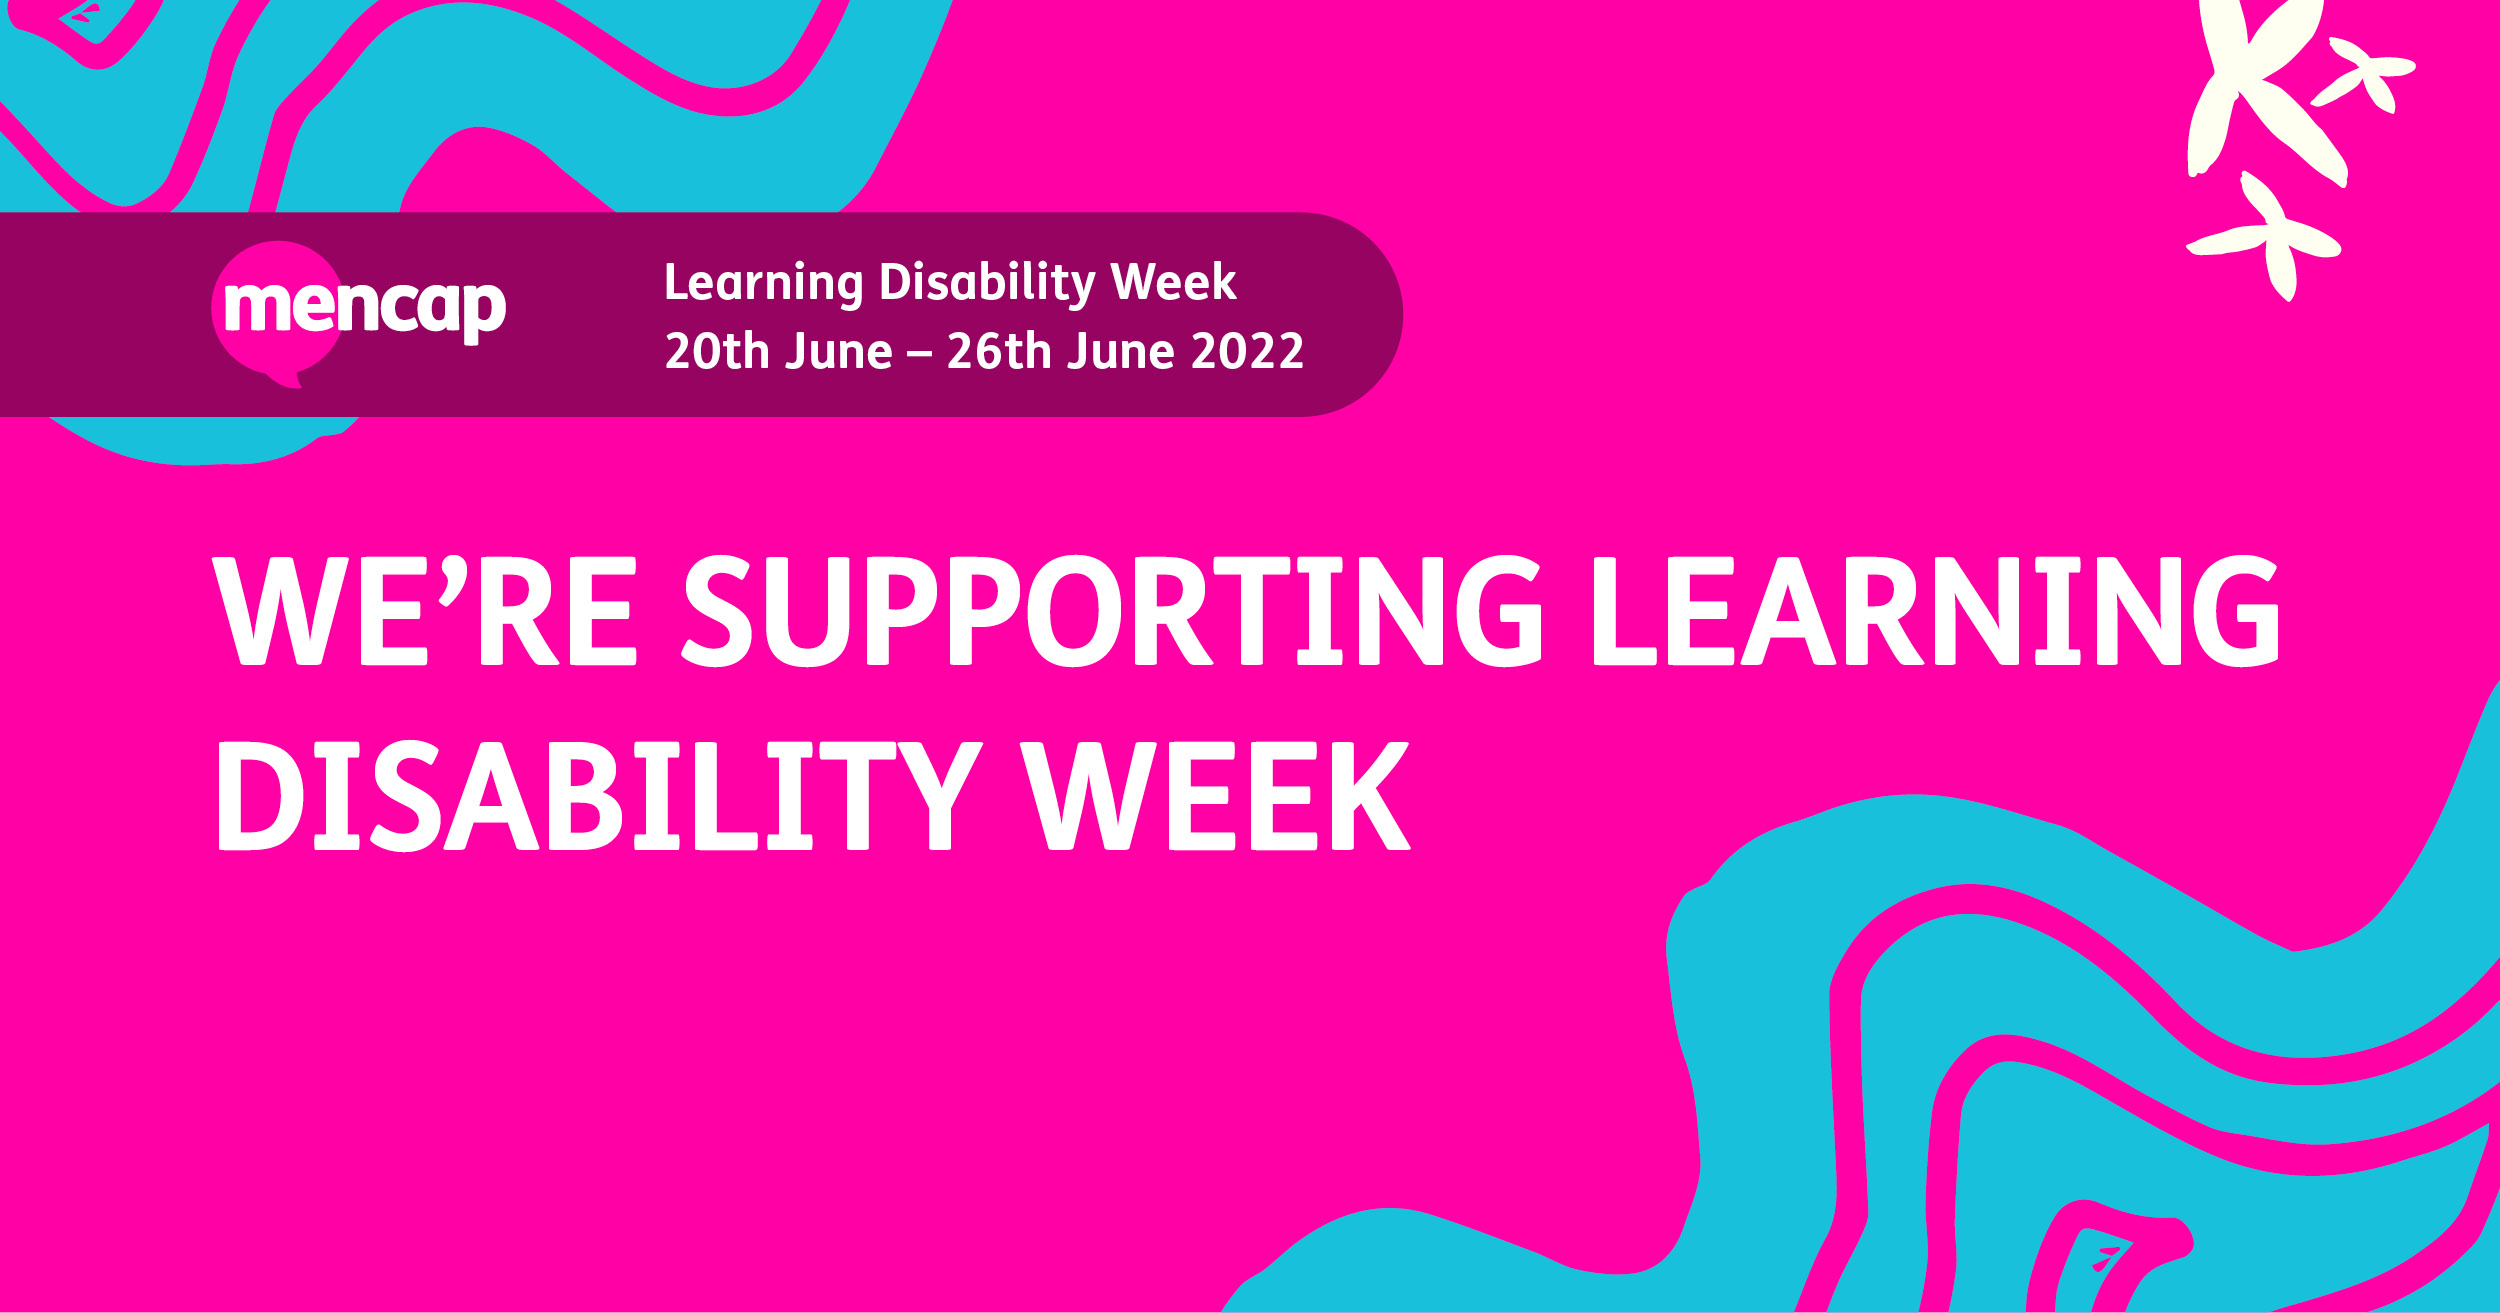 We're supporting learning disability week